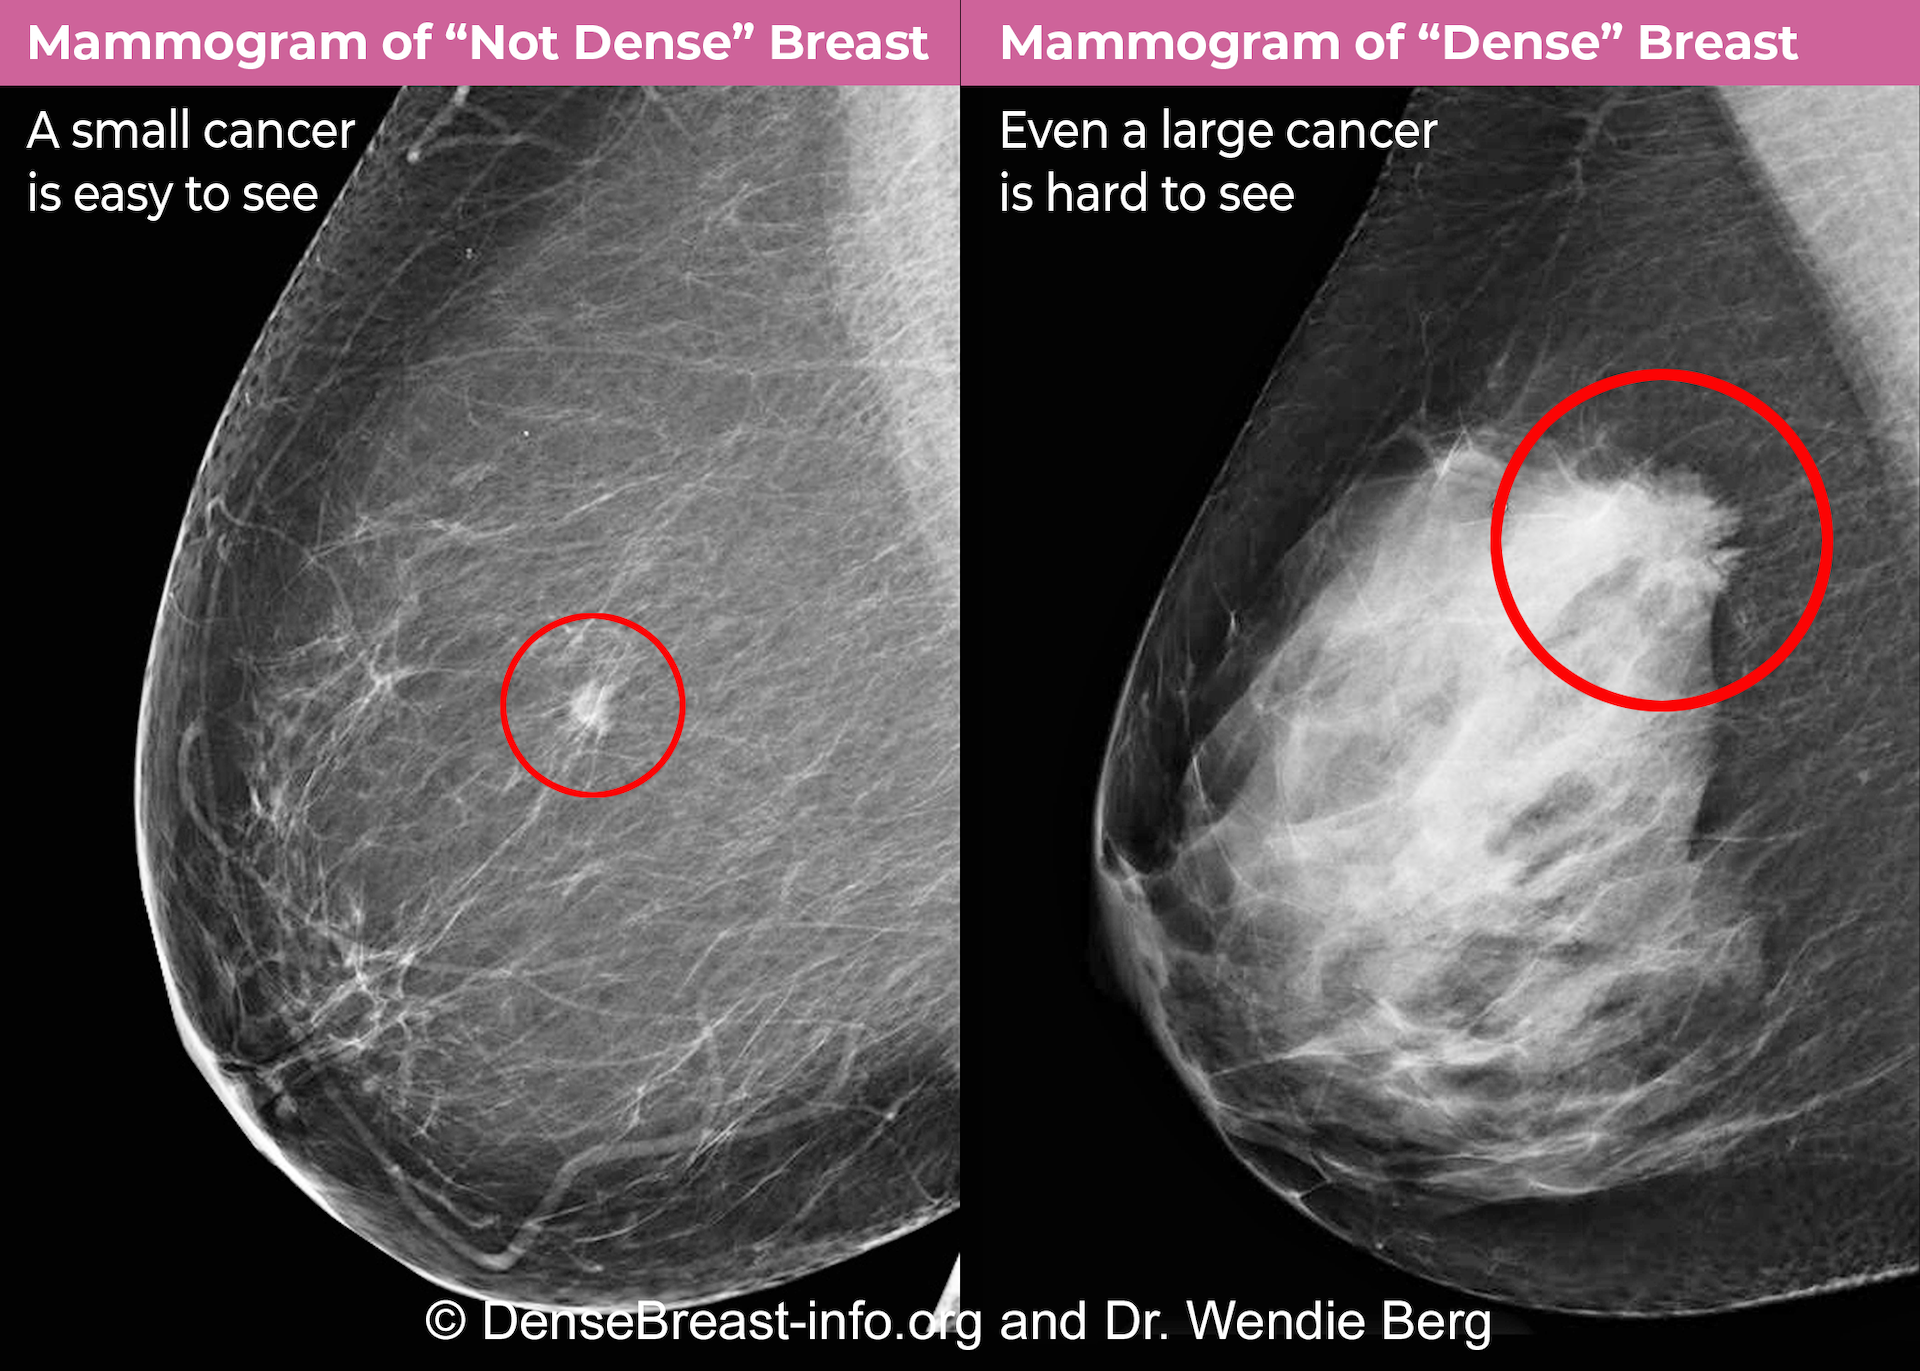 Mammography comparison of cancer easily seen in a a fatty ('not dense') breast on the left and hard to see in a 'dense' breast on the right.